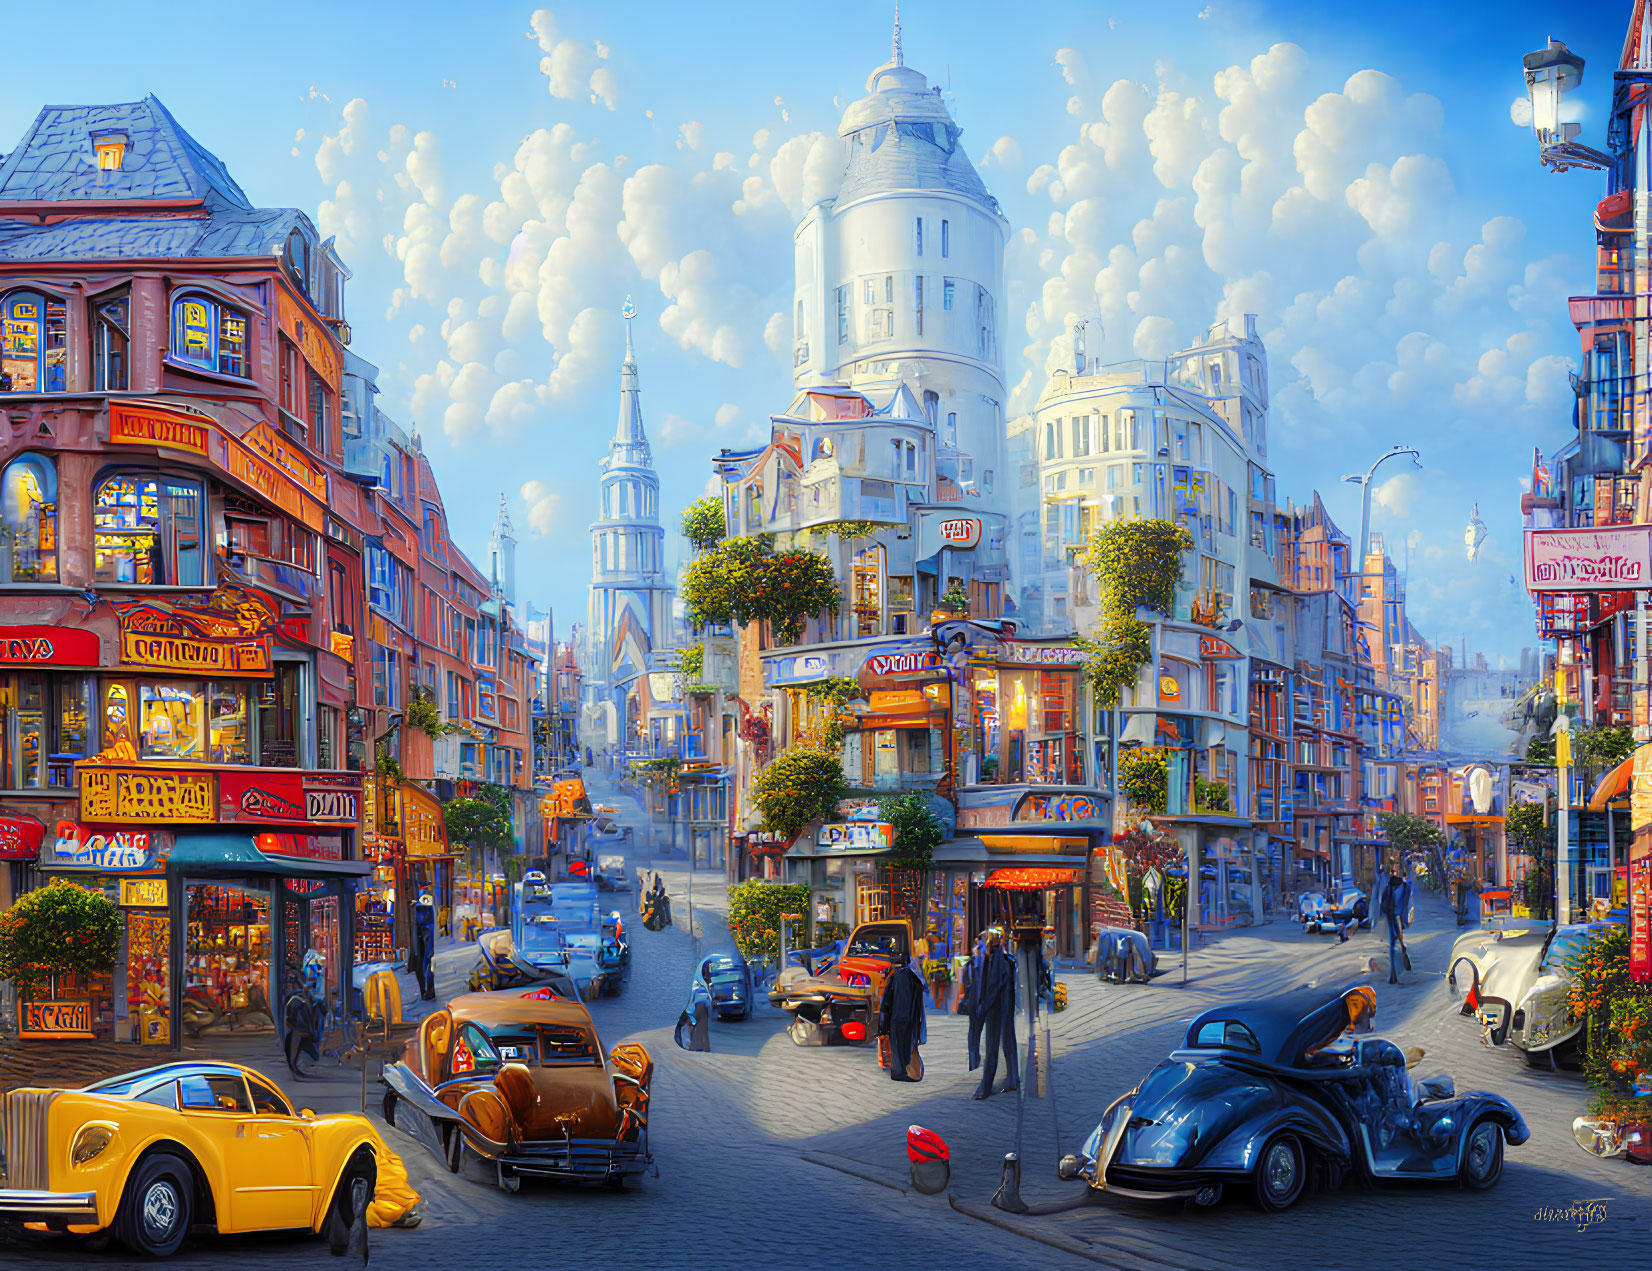 Colorful Street Scene with Classic Cars and Shops under Sunny Sky